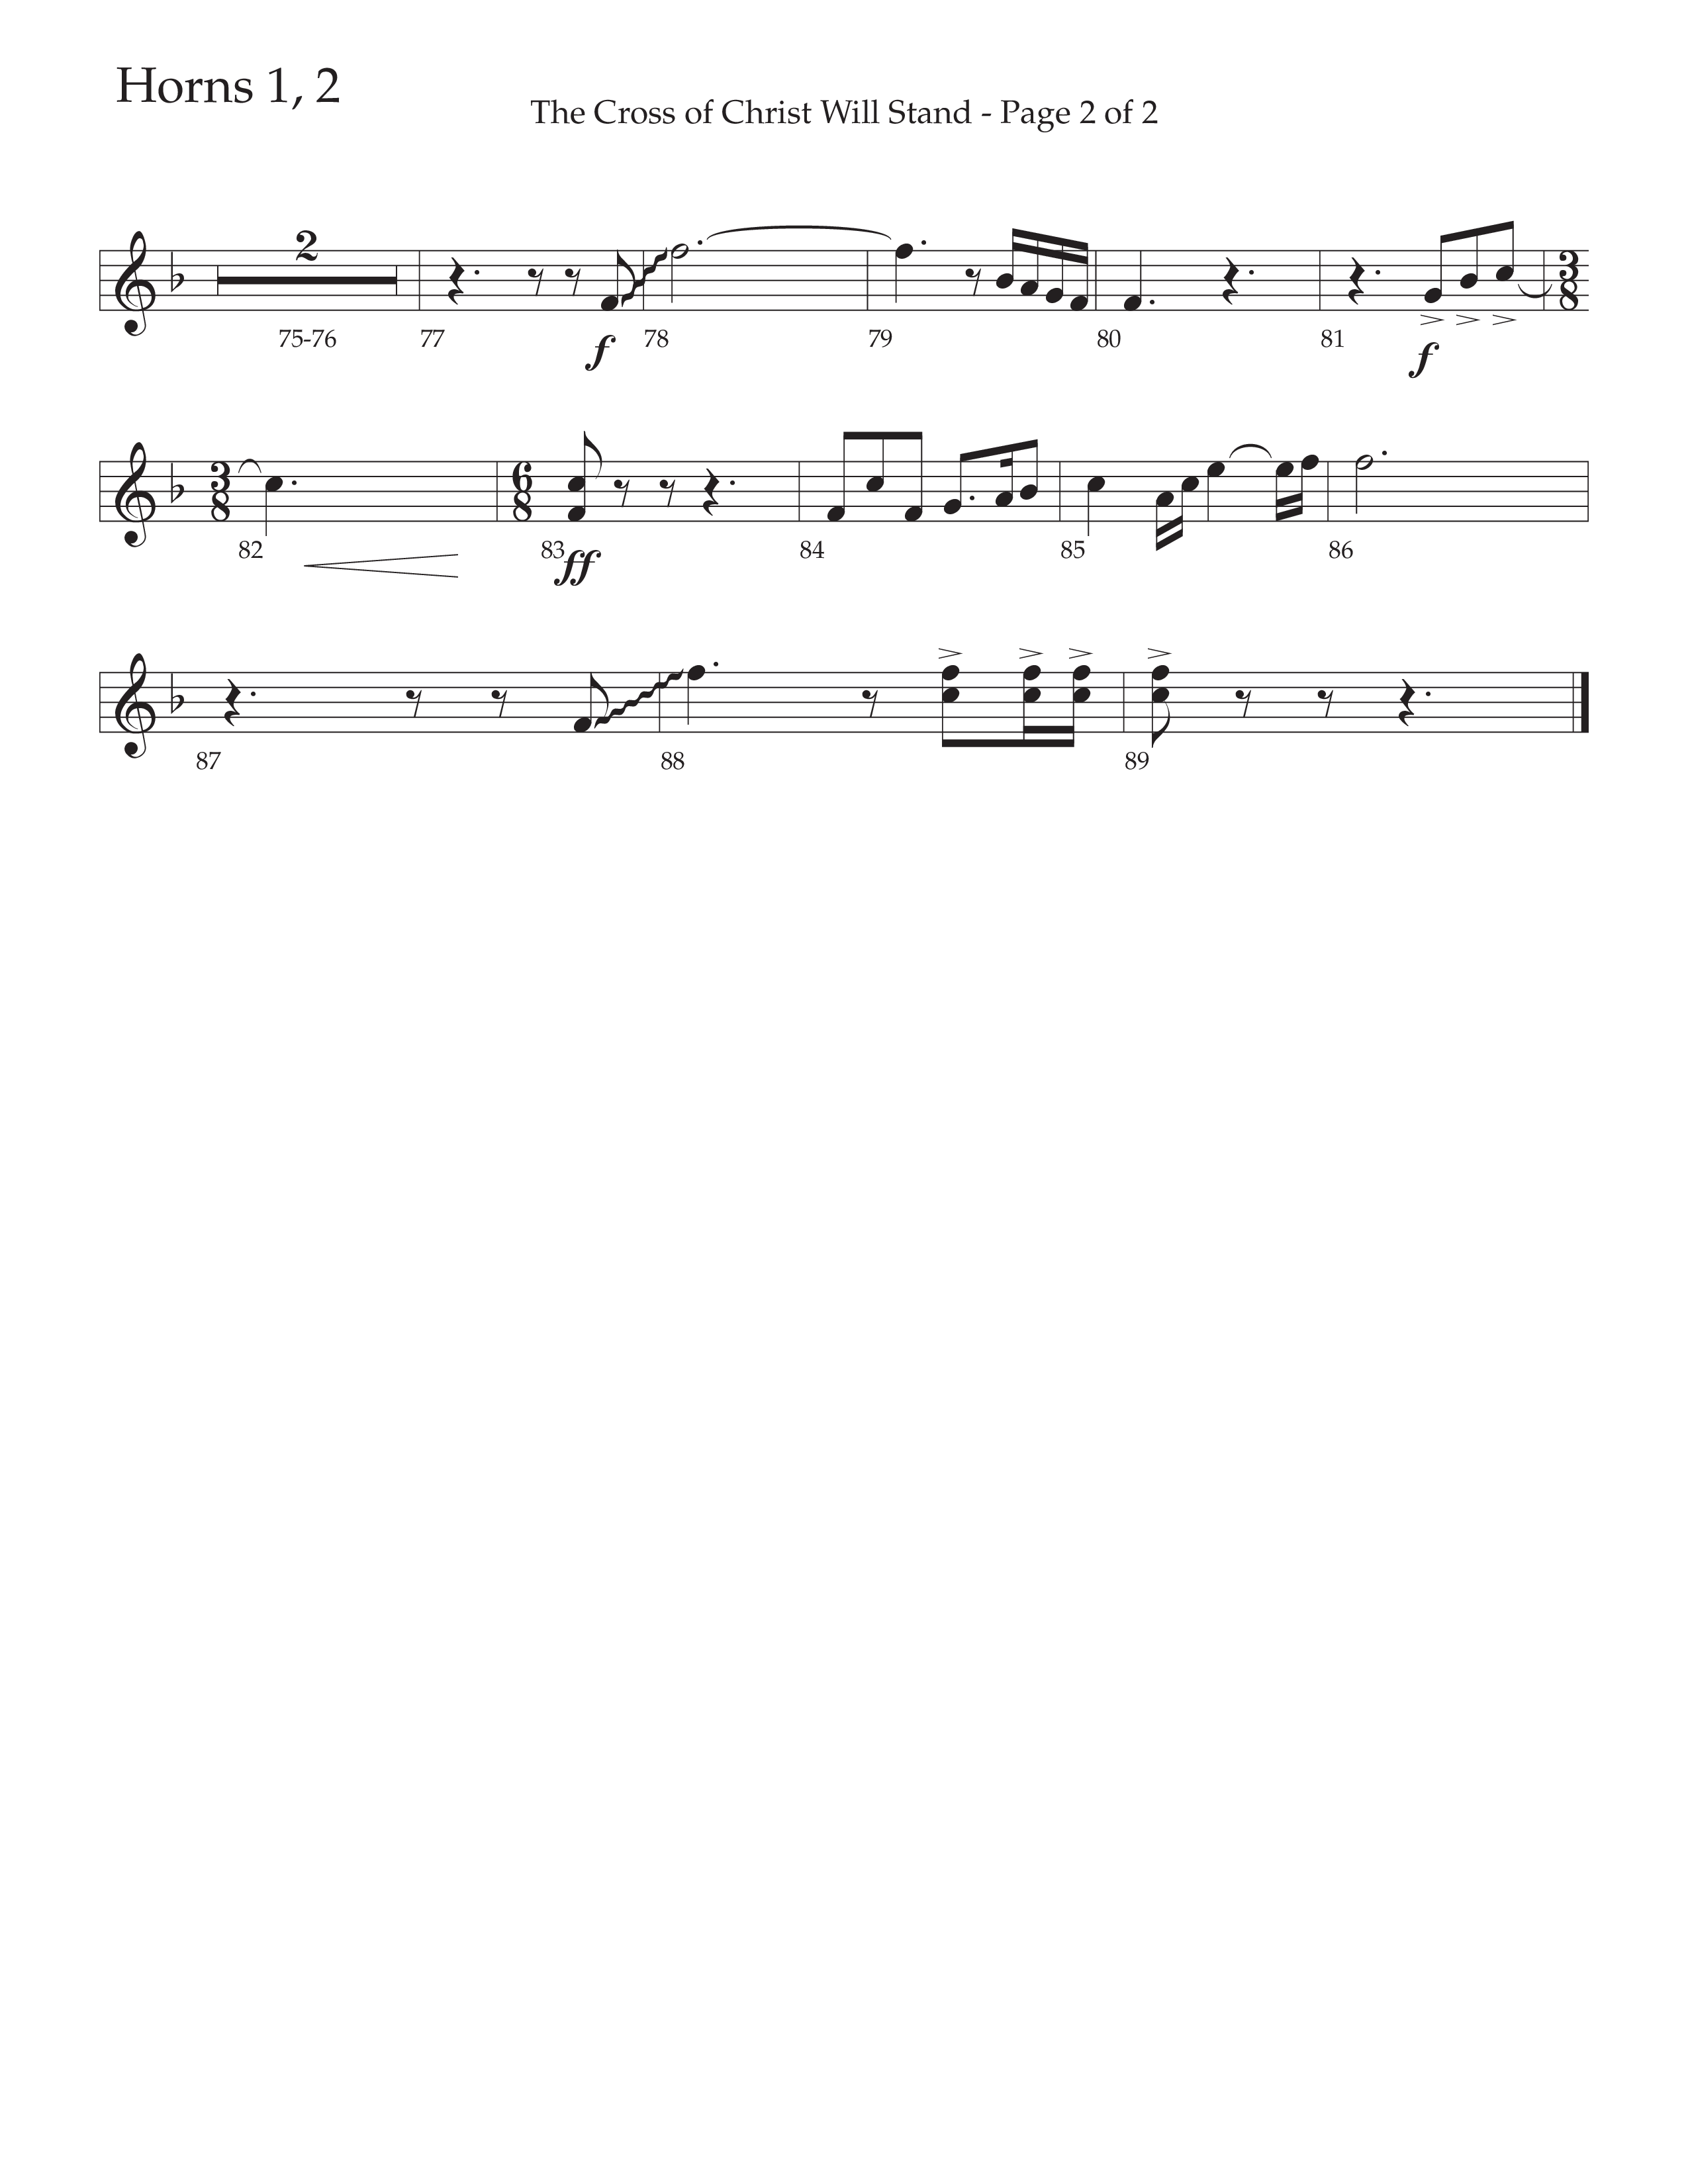 The Cross of Christ Will Stand (Choral Anthem SATB) French Horn 1/2 (Daywind Worship / Arr. Luke Gambill)